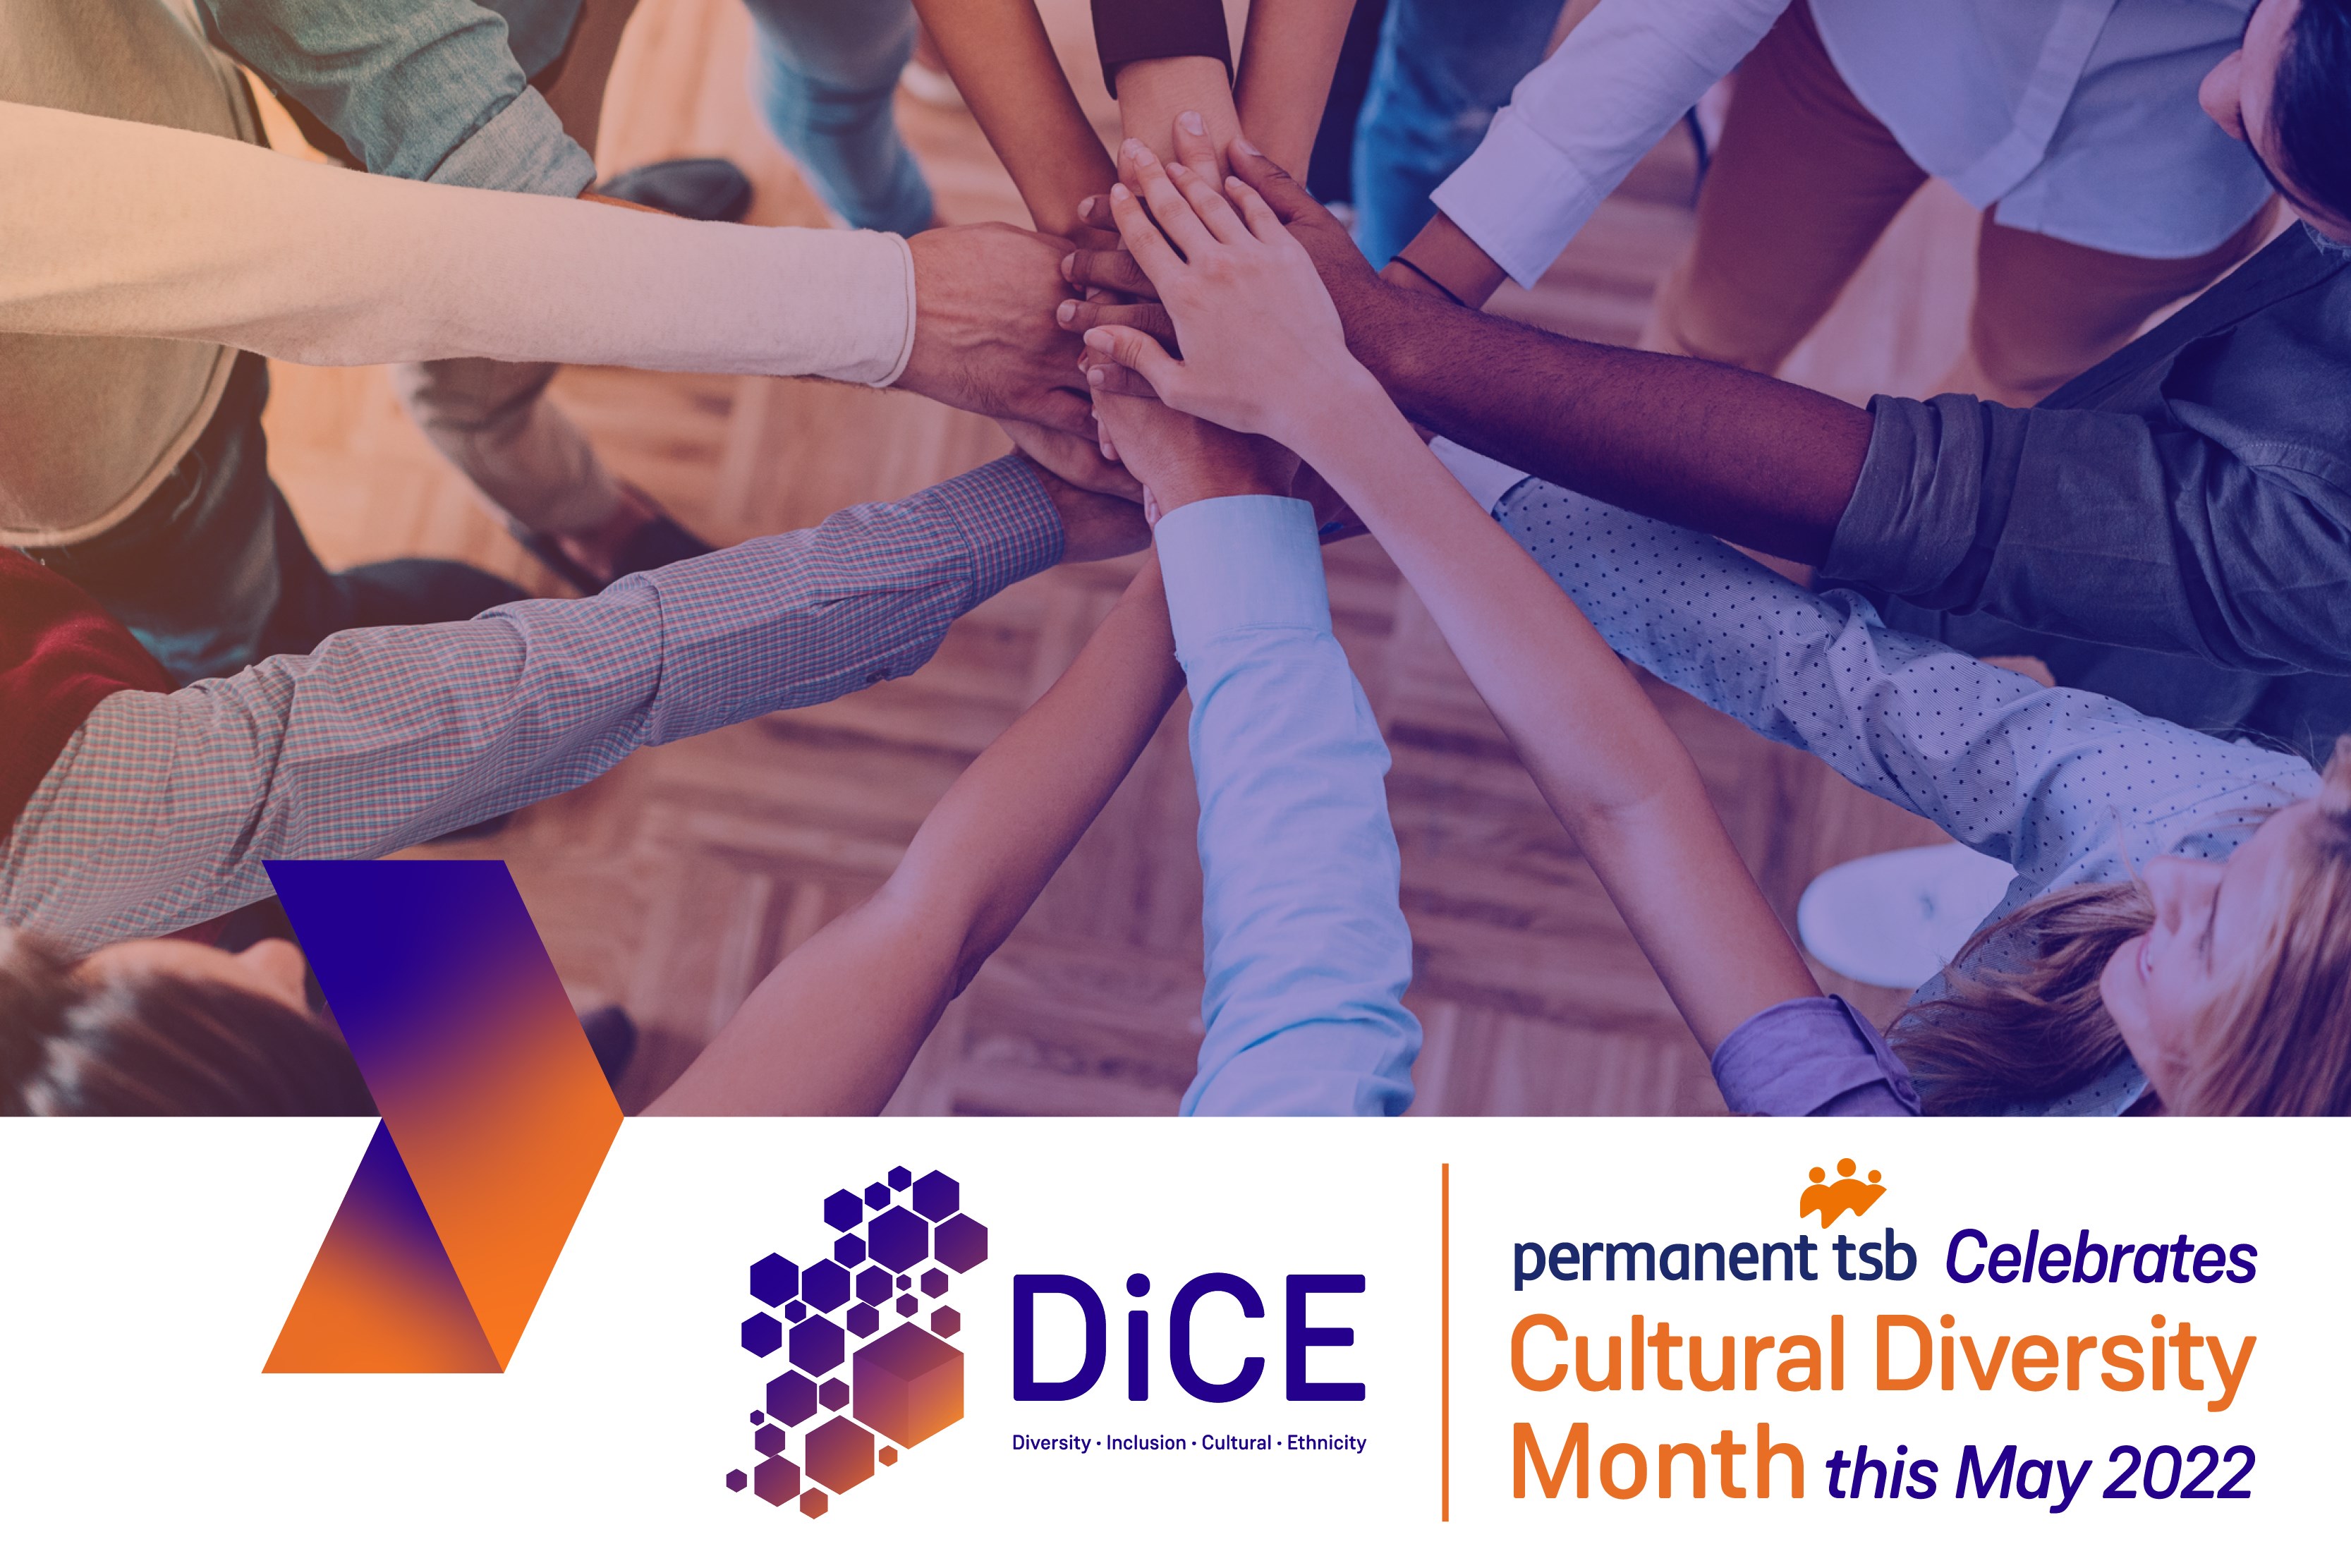 banner with image showing people from different cultural backgrounds all holding hands in a stack, text underneath 'DiCE, Cultural Diversity Month